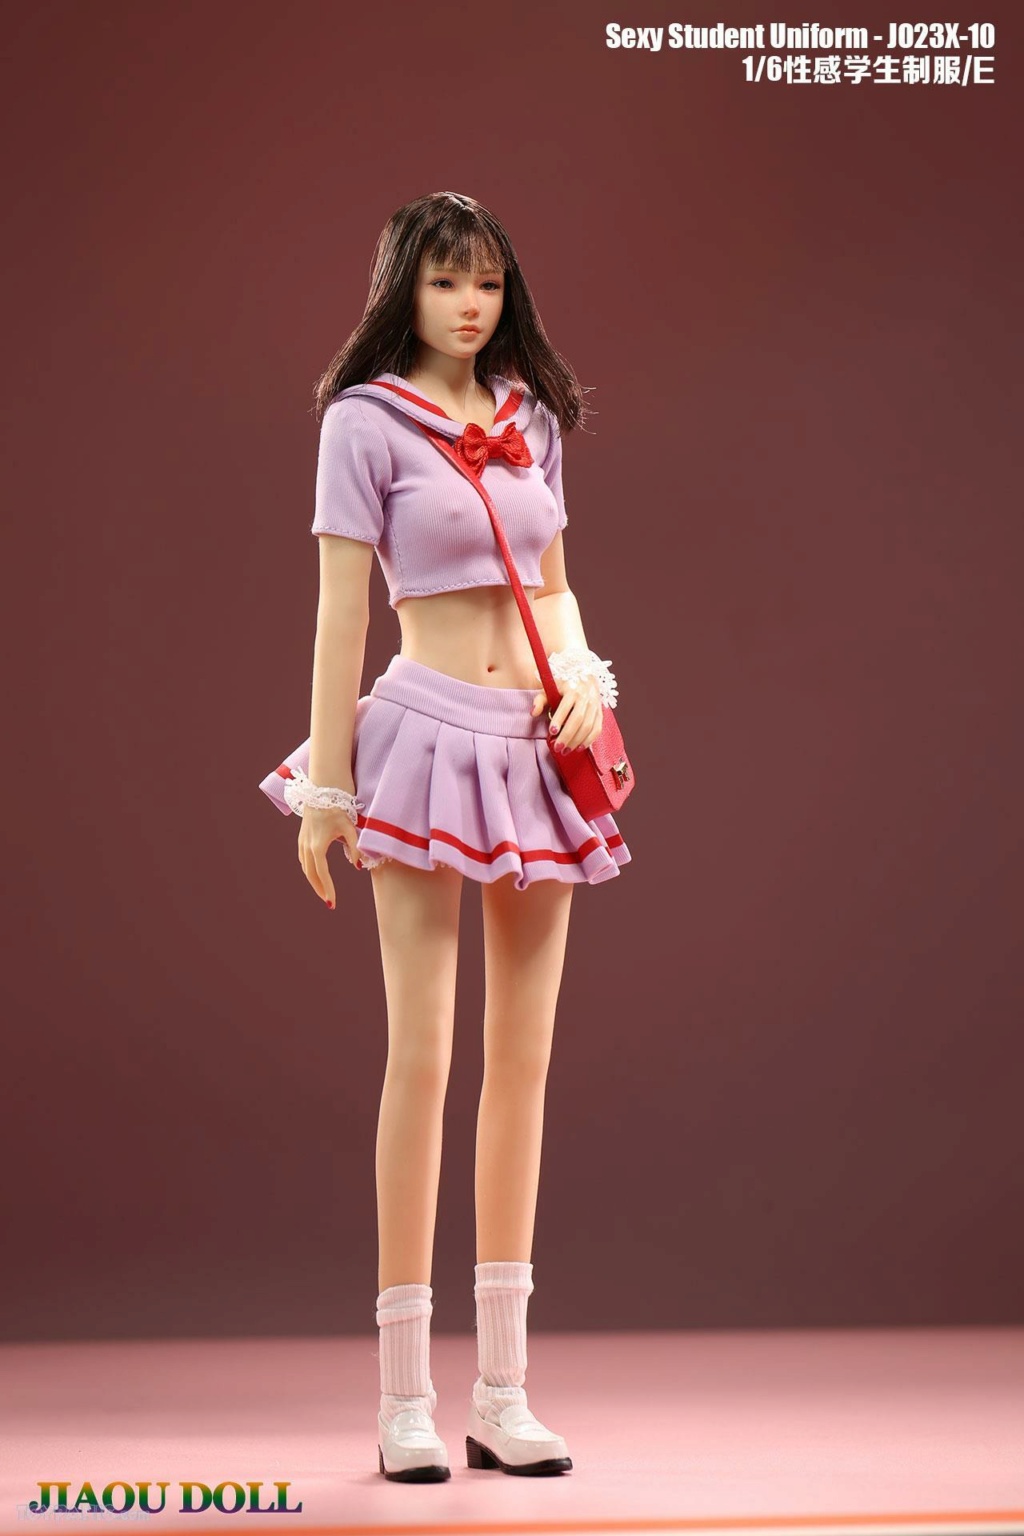 SexyStudentUniform - NEW PRODUCT: Jiaou Doll: 1/6 Sexy Student Uniform (7 color options) (JO23X-10A-G) (NSFW) 20920235